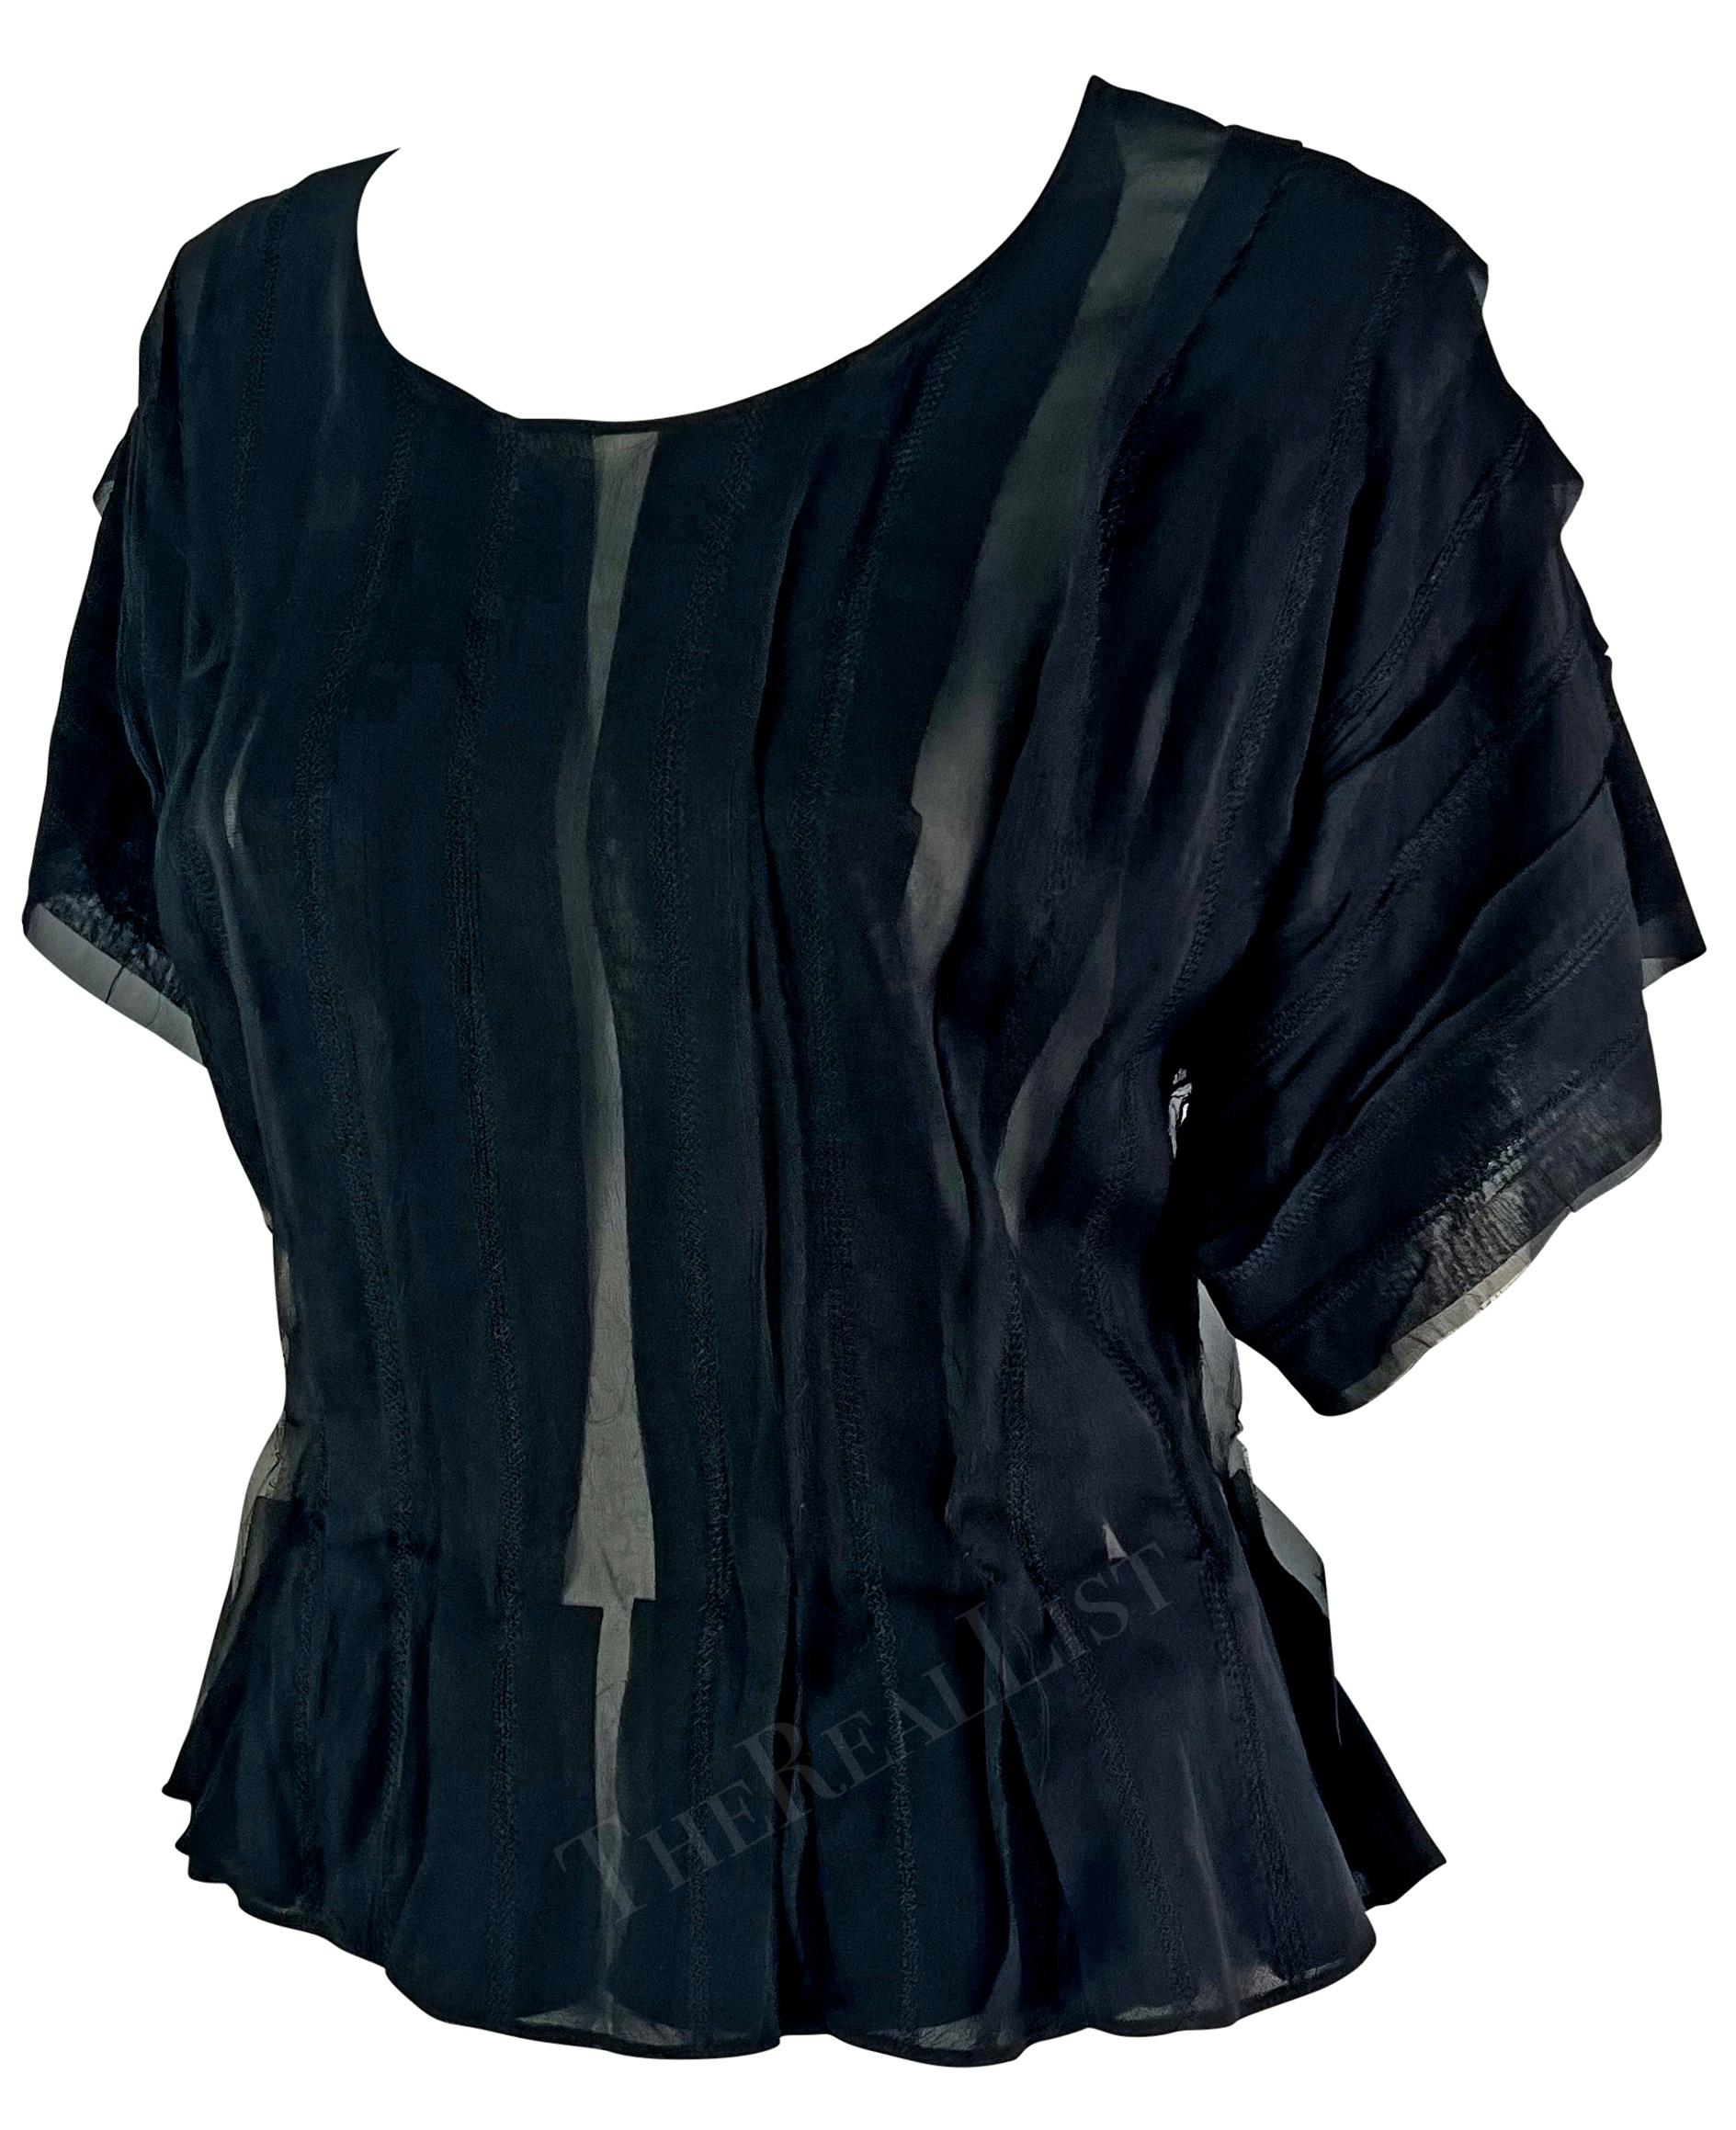 Presenting a fabulous black silk Yves Saint Laurent Rive Gauche short-sleeve top, designed by Tom Ford. From the Spring/Summer 2002 collection, this sheer top features vertical ribbons, a scoop neckline, oversized sleeves, and a light peplum.